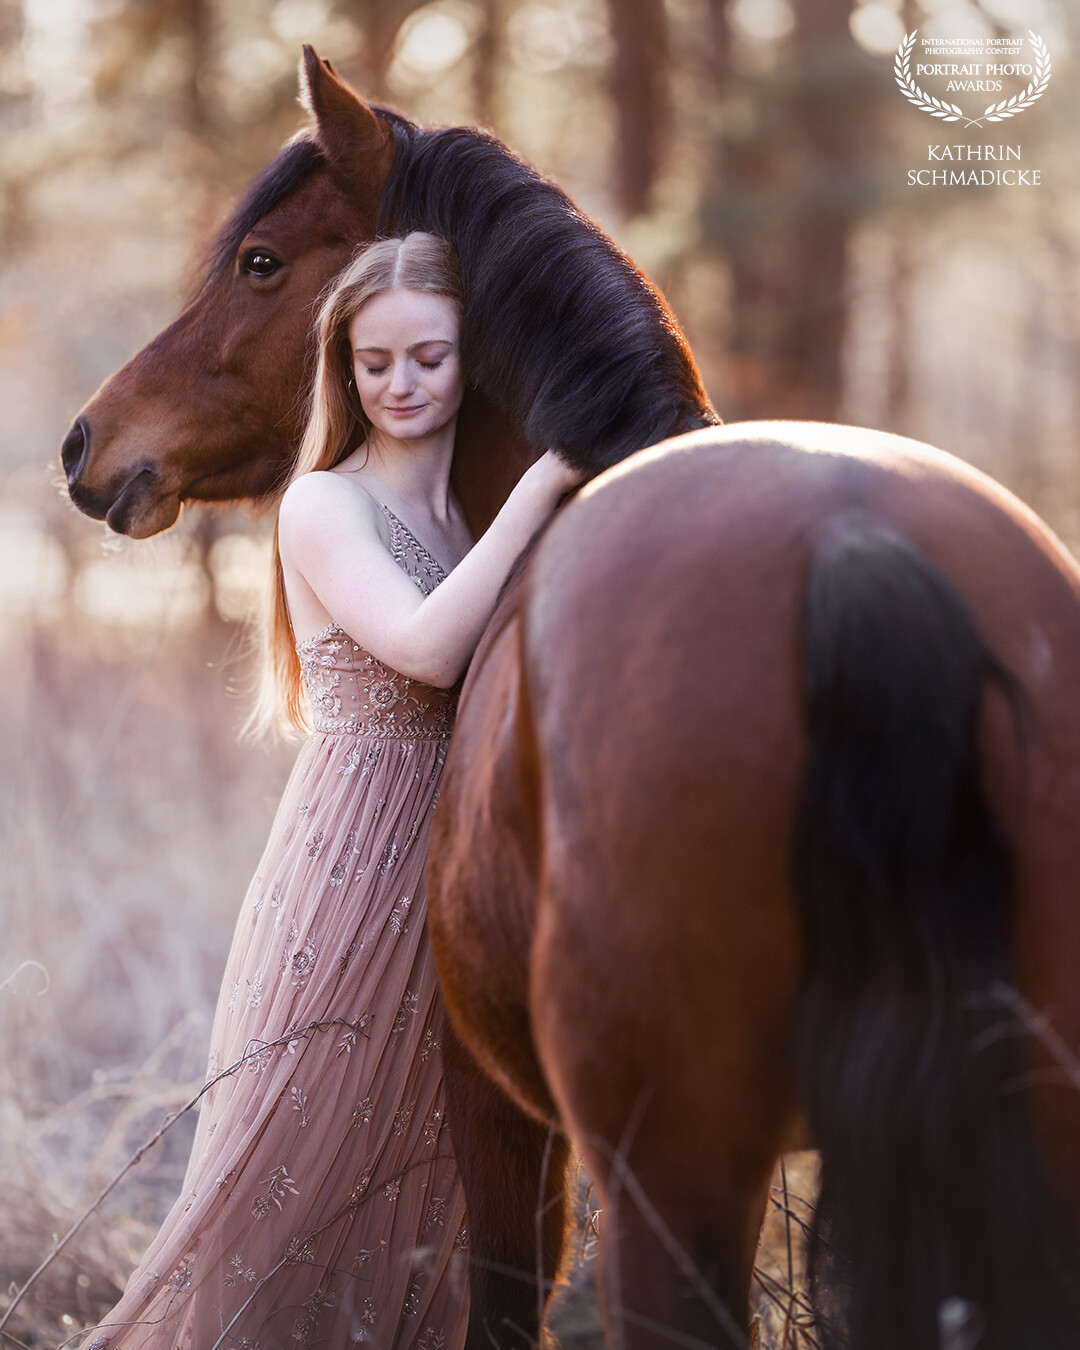 capturing the intensity of an intimate connection between horse and human and unique snapshots are one of the most beautiful things I can imagine in photography